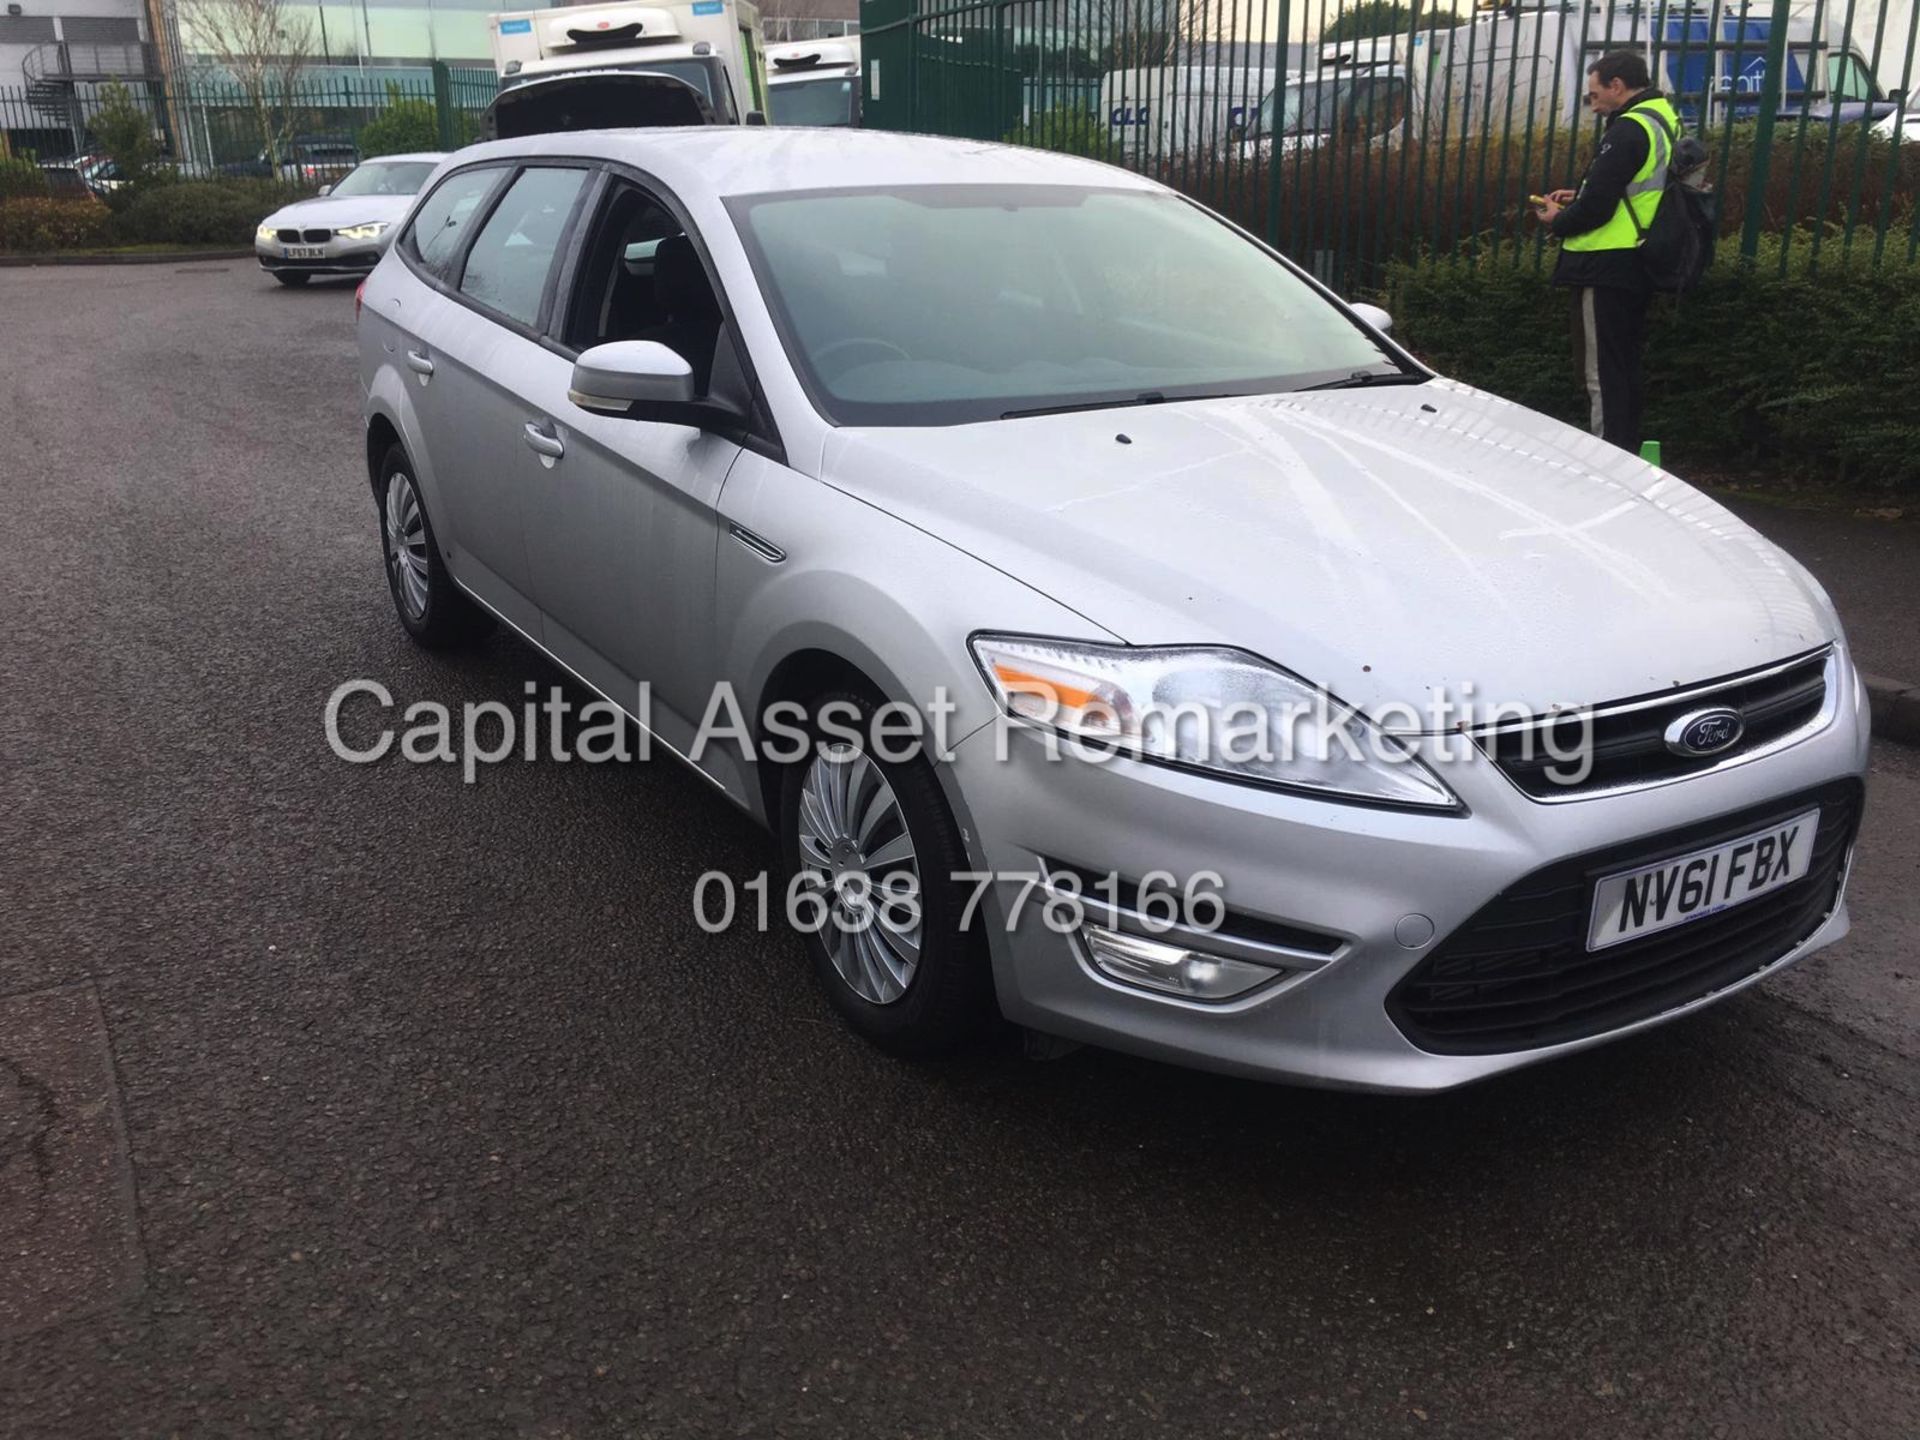 On Sale FORD MONDEO 2.0TDCI "ZETEC" ESTATE (2011 MODEL) 140BHP - 6 SPEED - CLIMATE - ELEC PACK